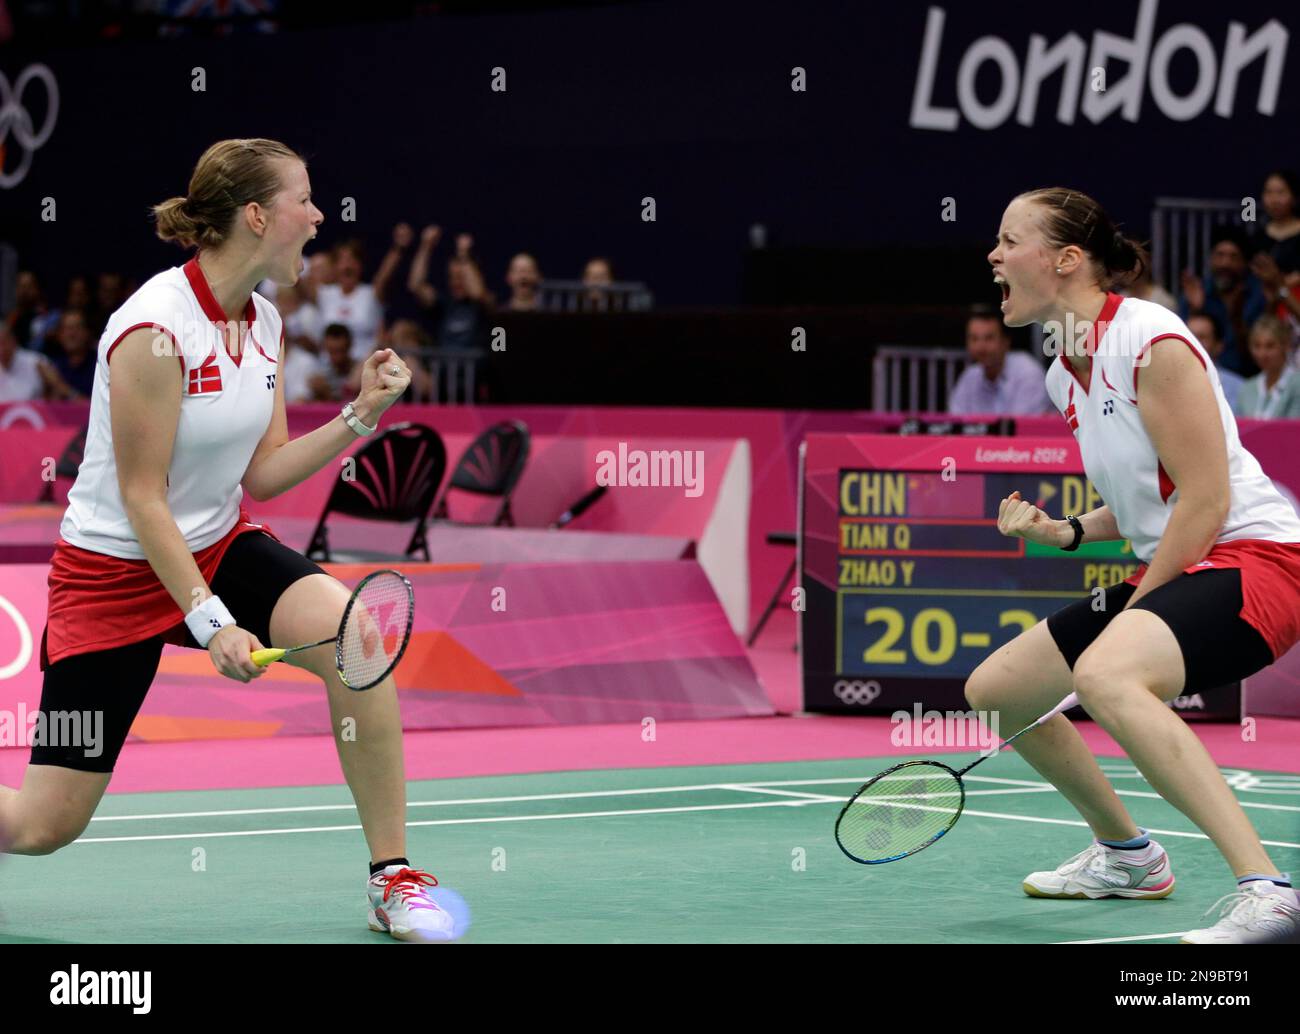 Denmark's Pedersen, left, and Kamilla Rytter Juhl celebrate after winning the first game of the women's doubles badminton match against Tian Qing Zhao Yunlei of China, at the 2012 Summer